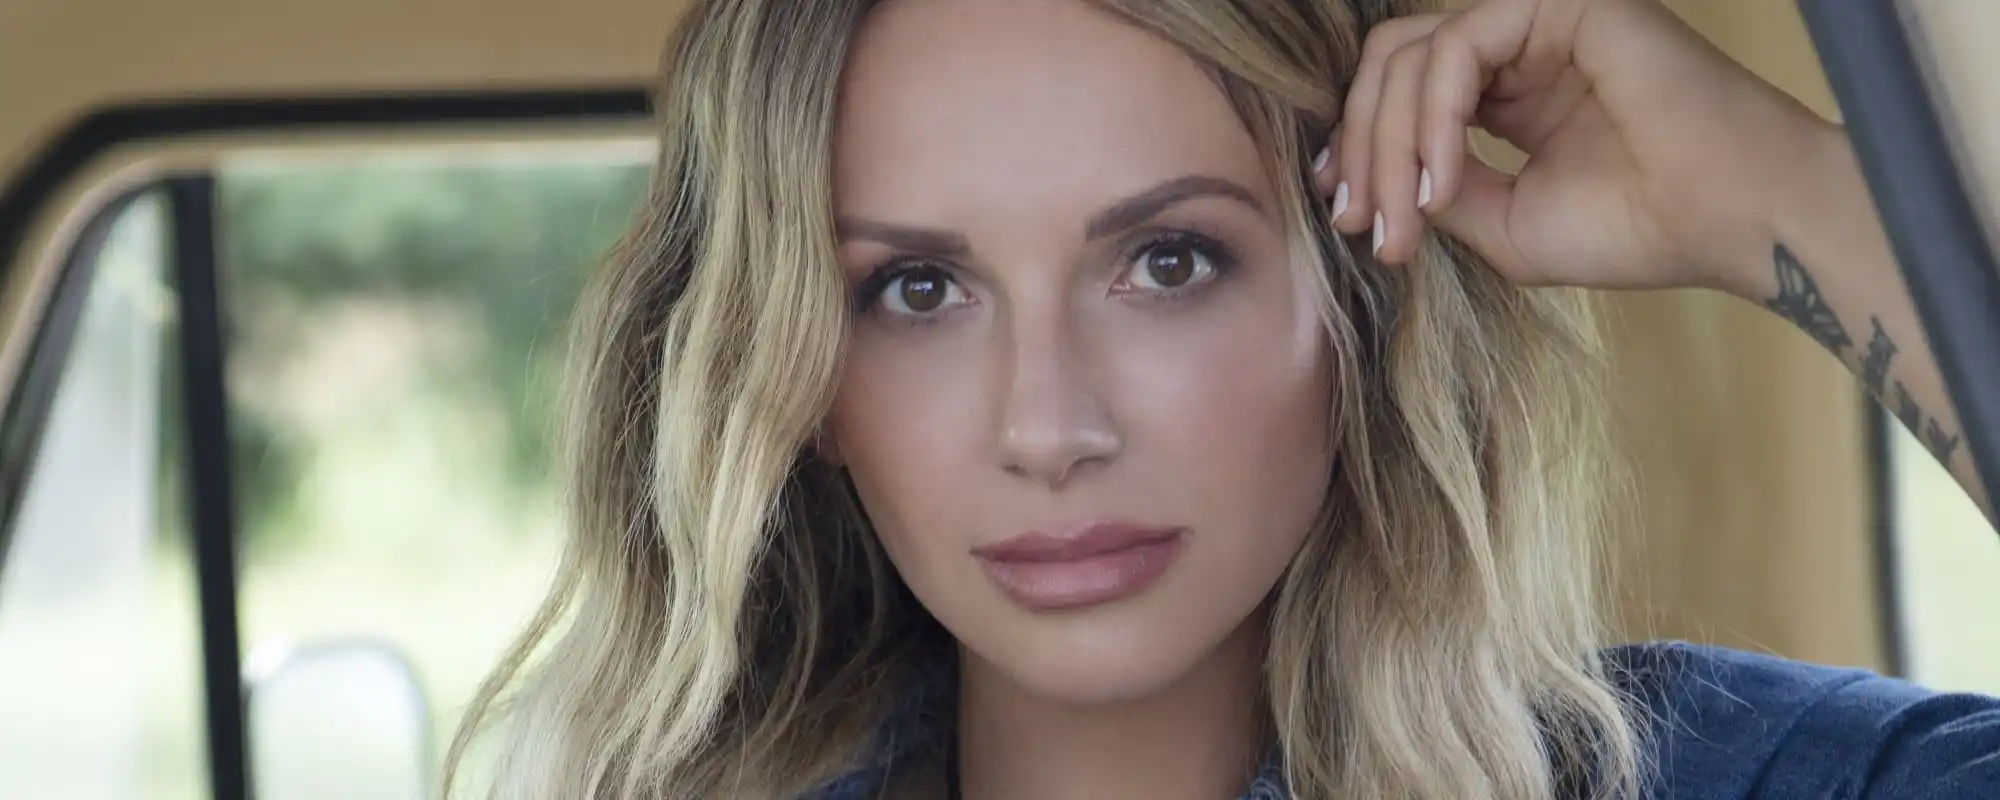 Carly Pearce Says Songwriting Saved Her in 2020, Especially When ‘Things Were Unravelling’